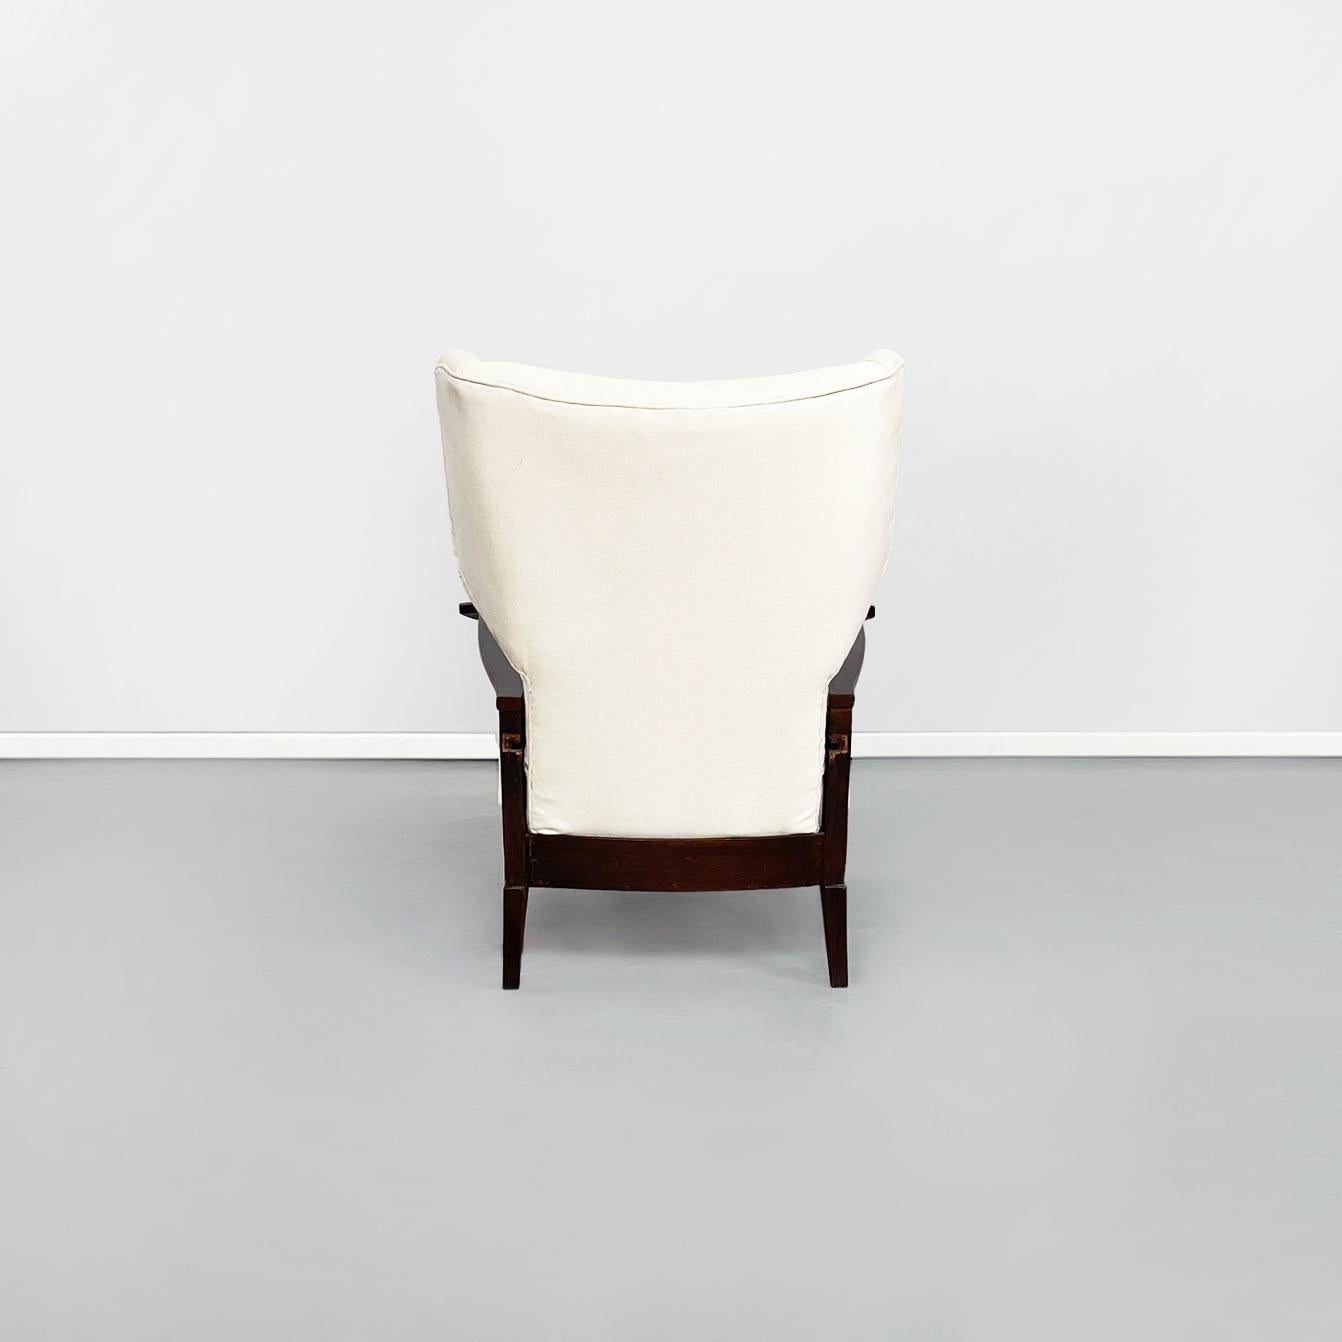 Mid-20th Century Italian Mid-Century White Fabric and Wooden Armchair by Paolo Buffa, 1950s For Sale